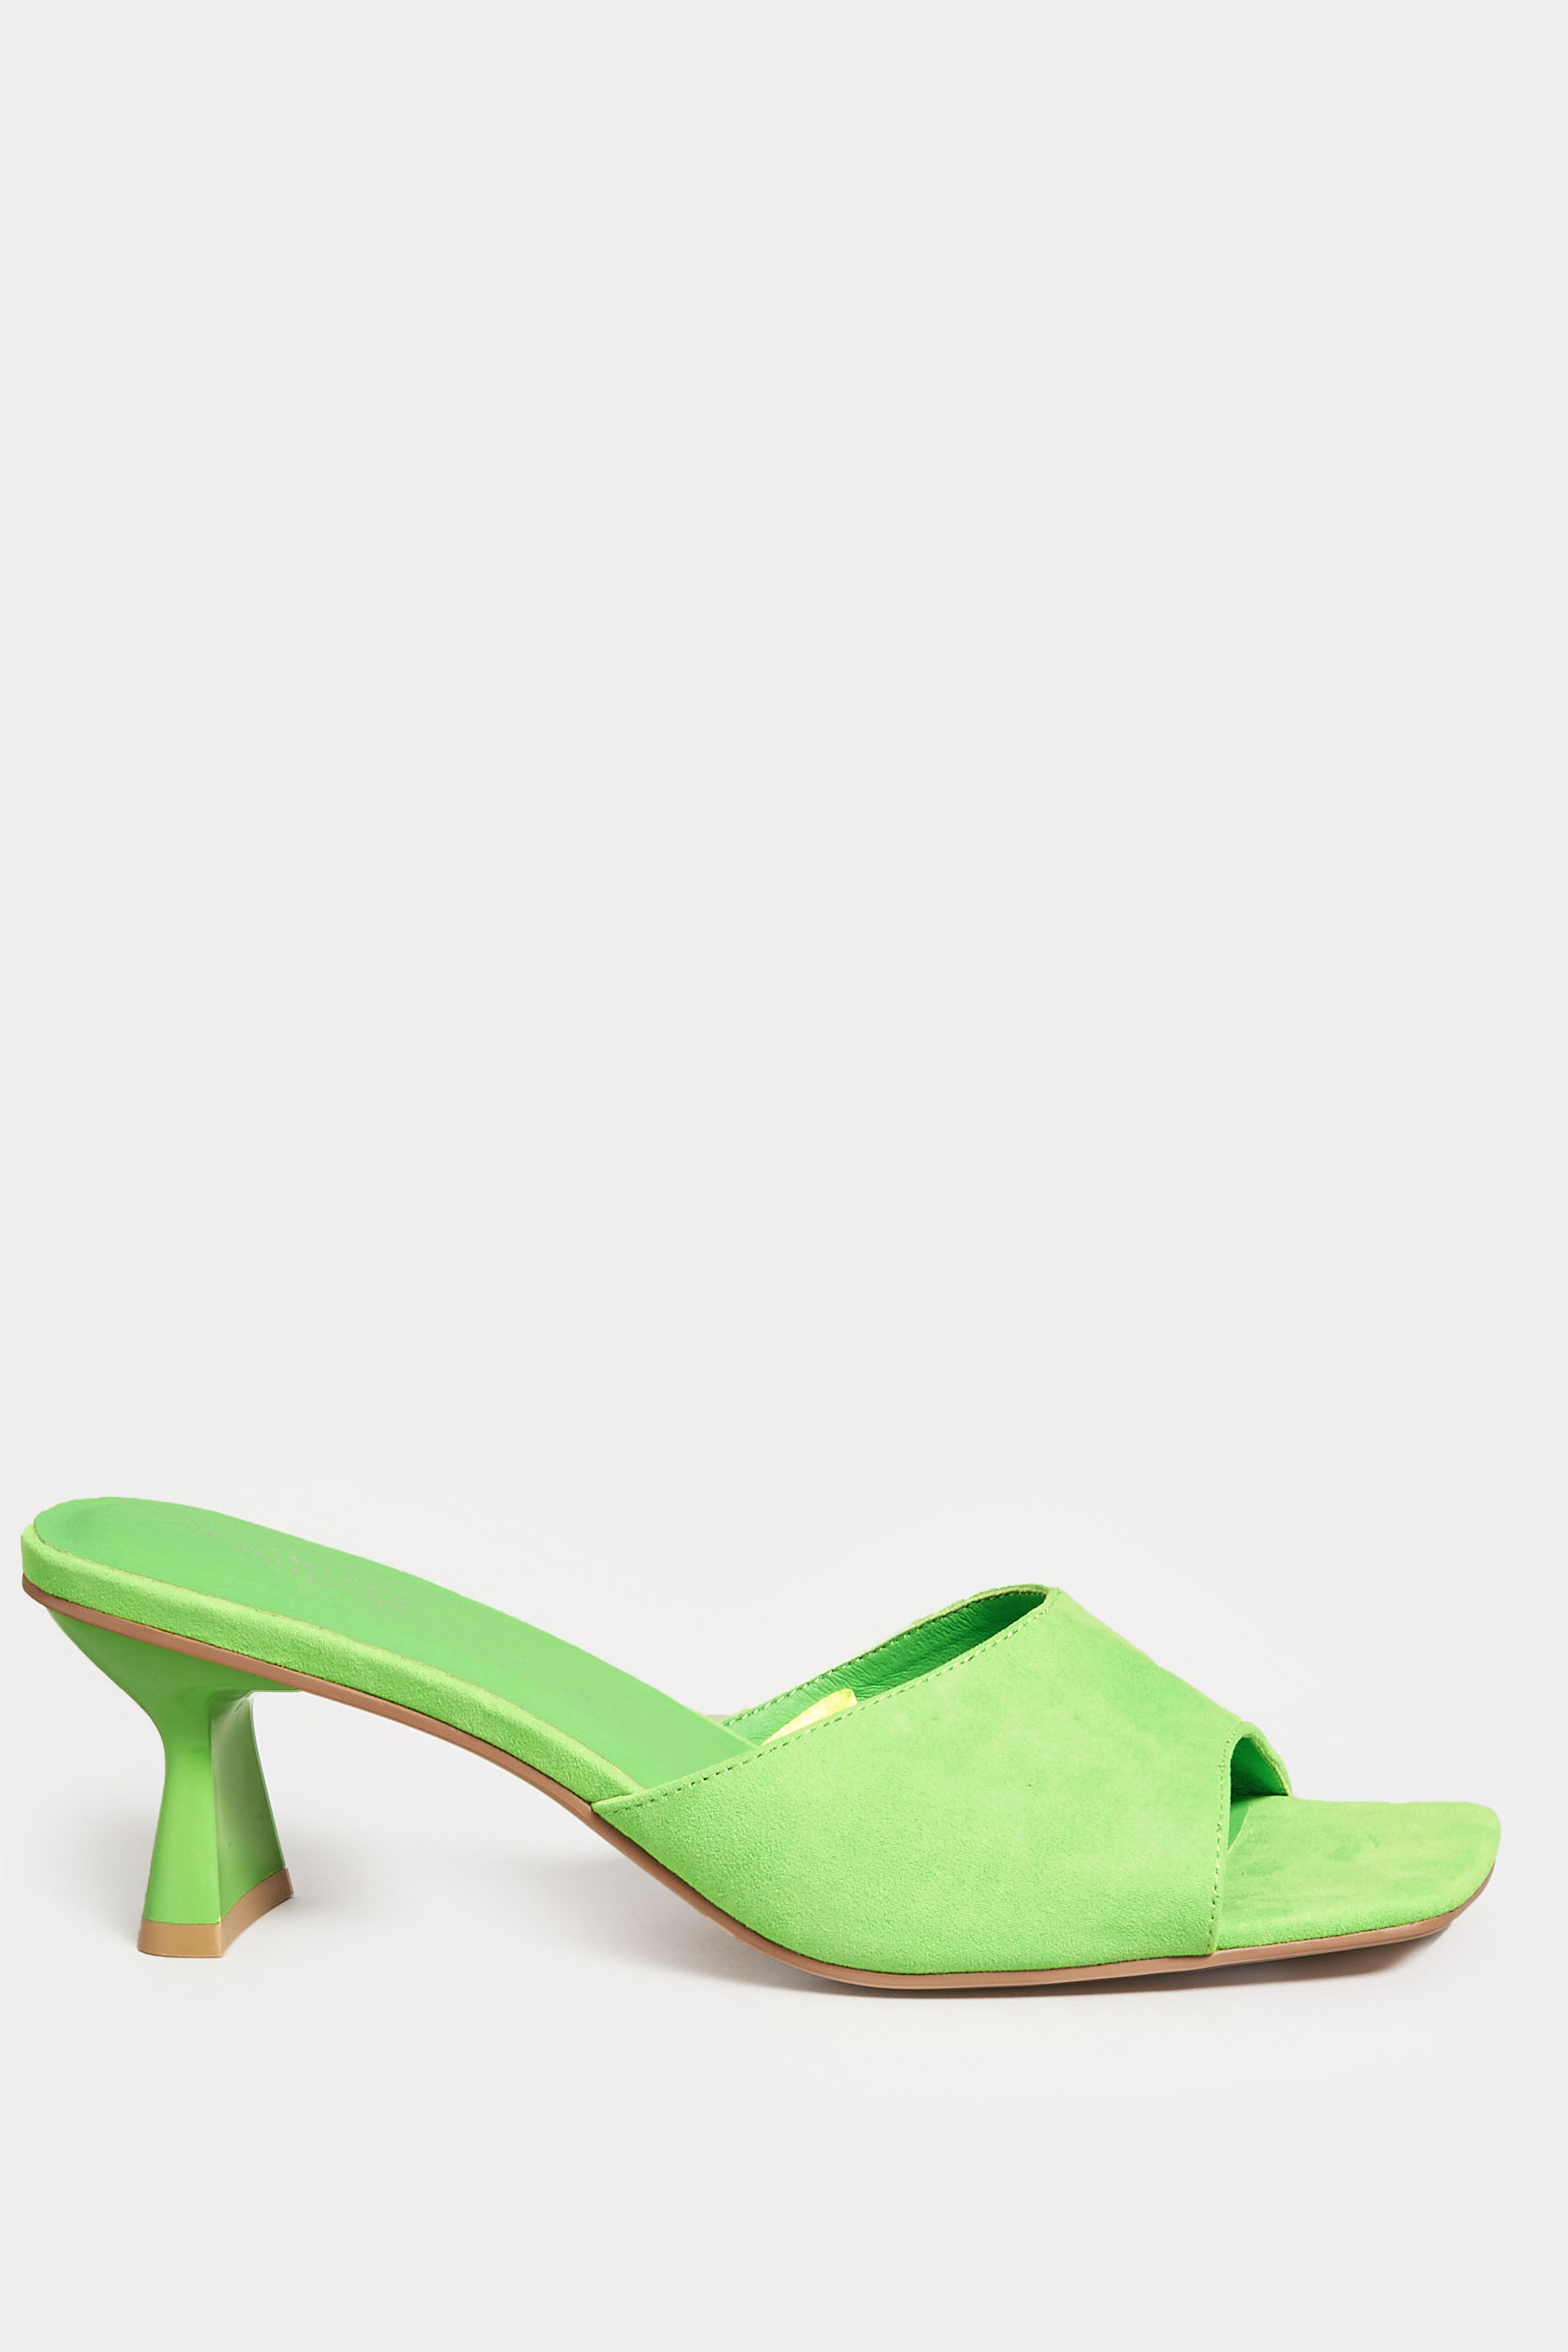 LIMITED COLLECTION Green Kitten Heel Mule In Wide E Fit & Extra Wide EEE Fit | Yours Clothing 3